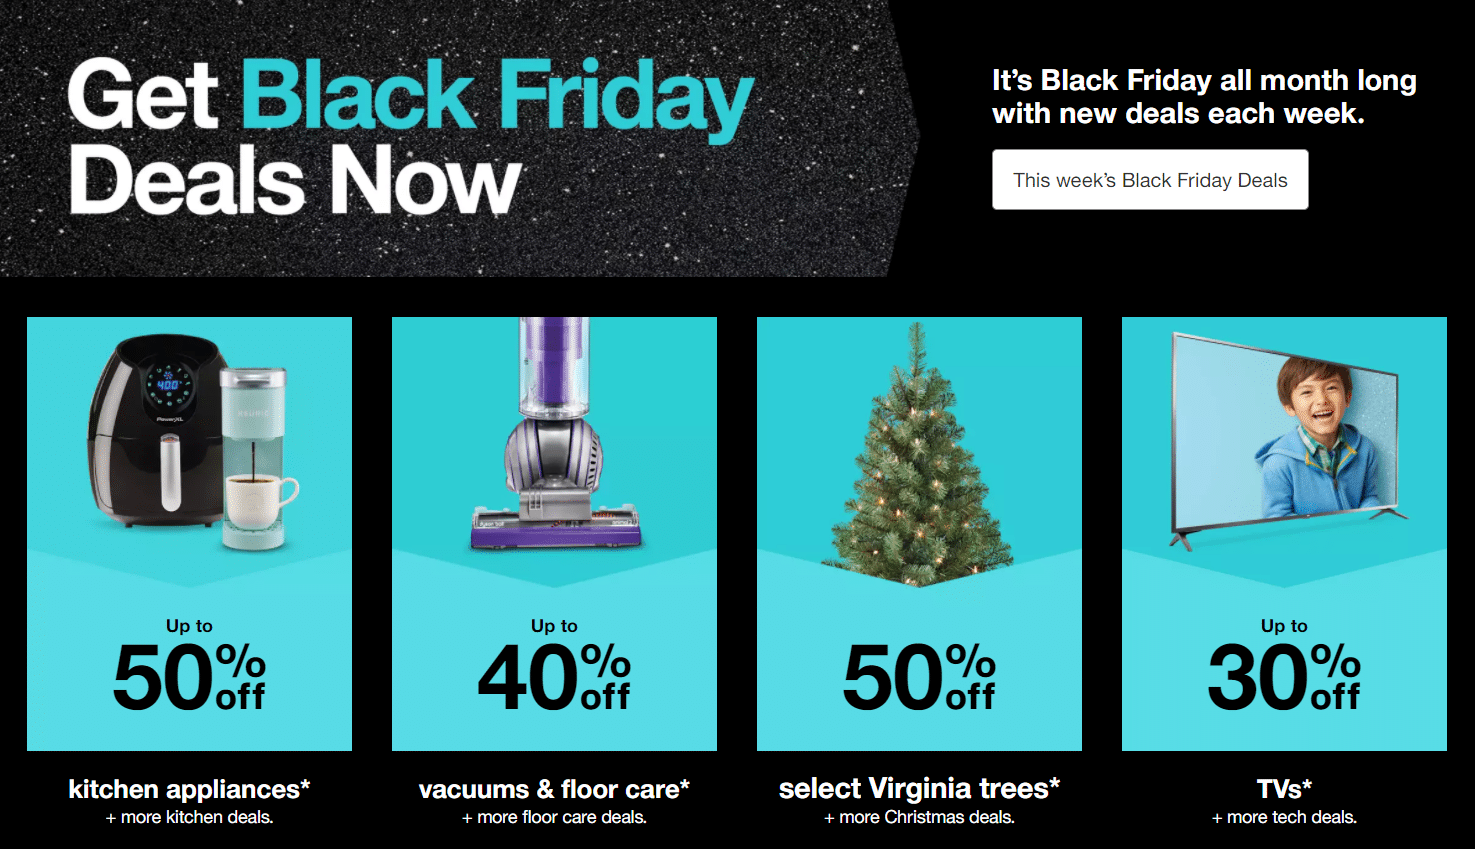 Black Friday Marketing Campaigns: Ideas and Examples